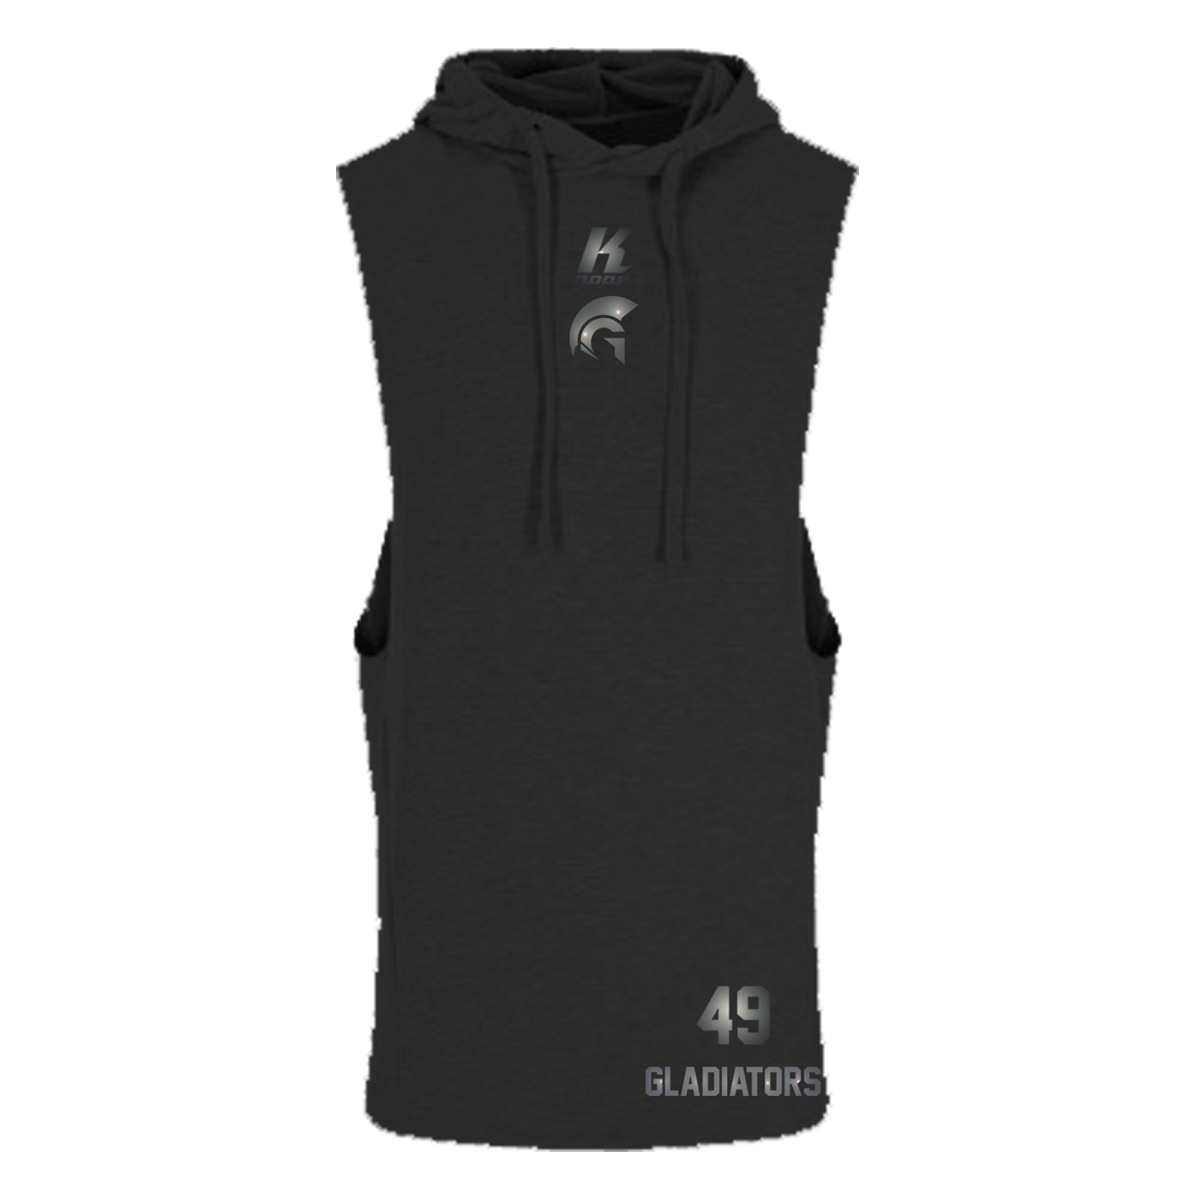 Gladiators "Blackline" Sleeveless Muscle Hoodie JC053 with Playernumber or Initials